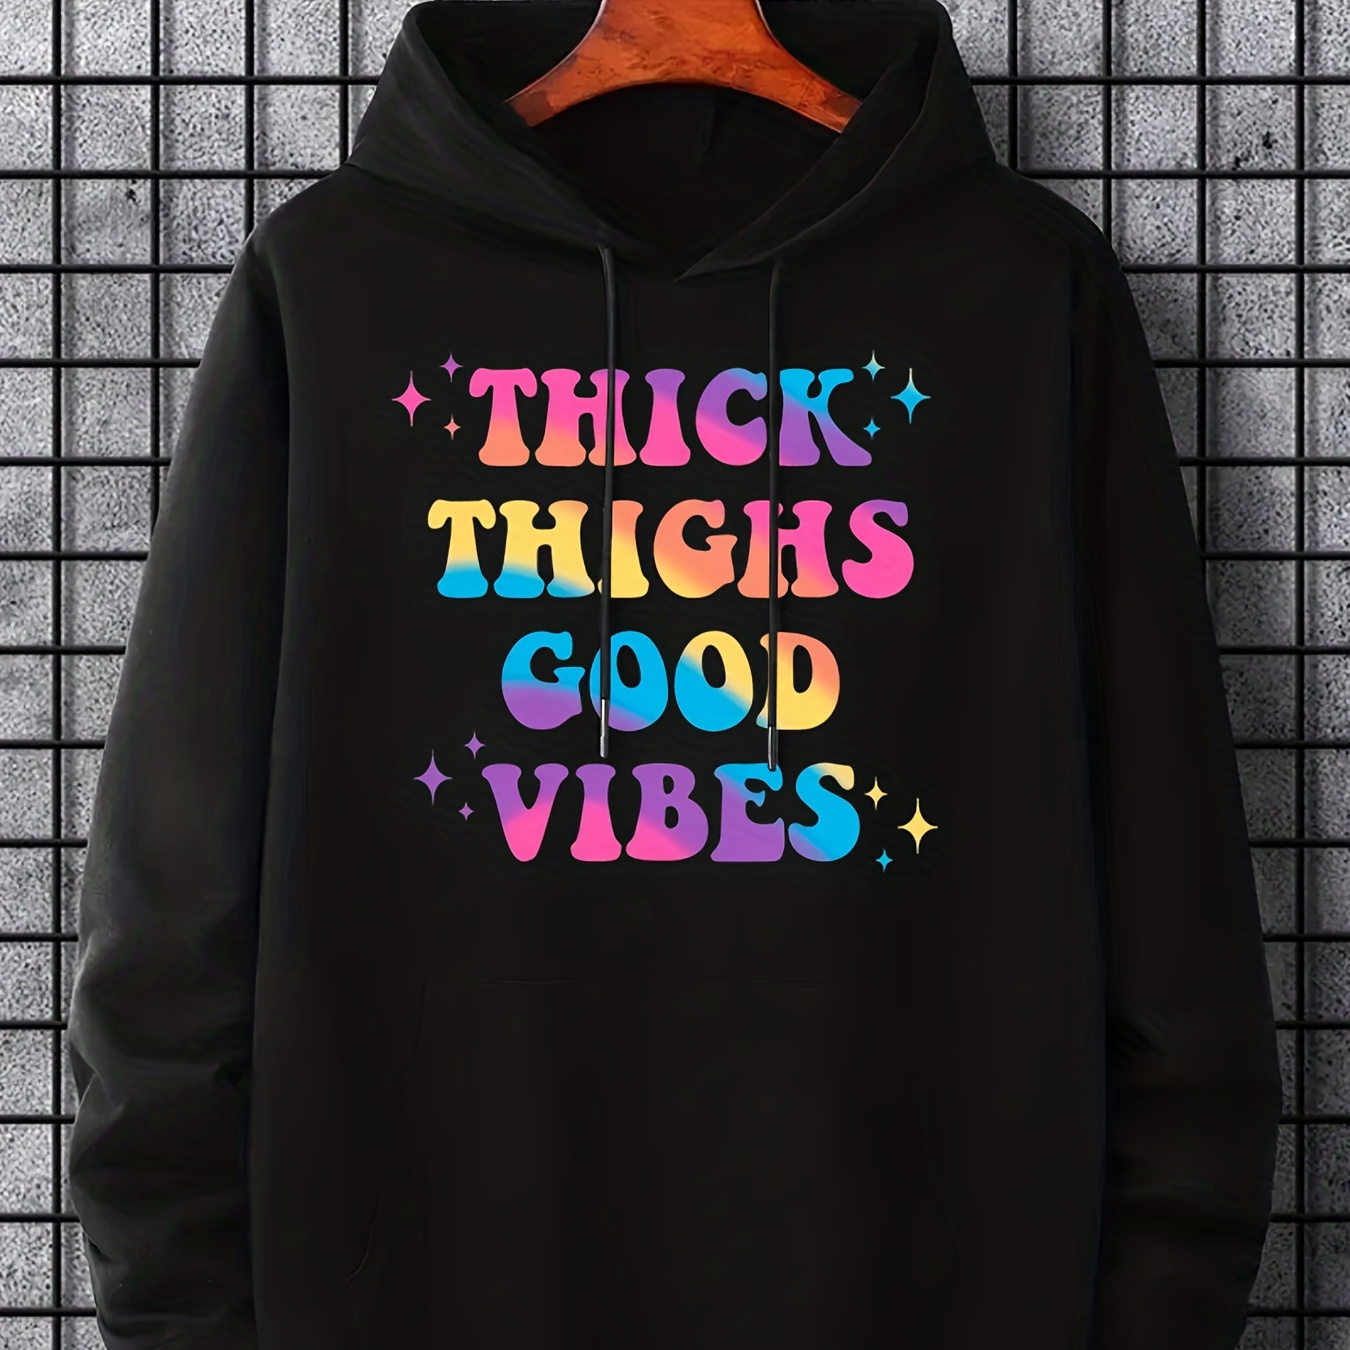 

Think Things Trendy Slogan Print Hoodie, Hoodies For Men, Men’s Casual Graphic Design Pullover Hooded Sweatshirt With Kangaroo Pocket For Spring Fall, As Gifts